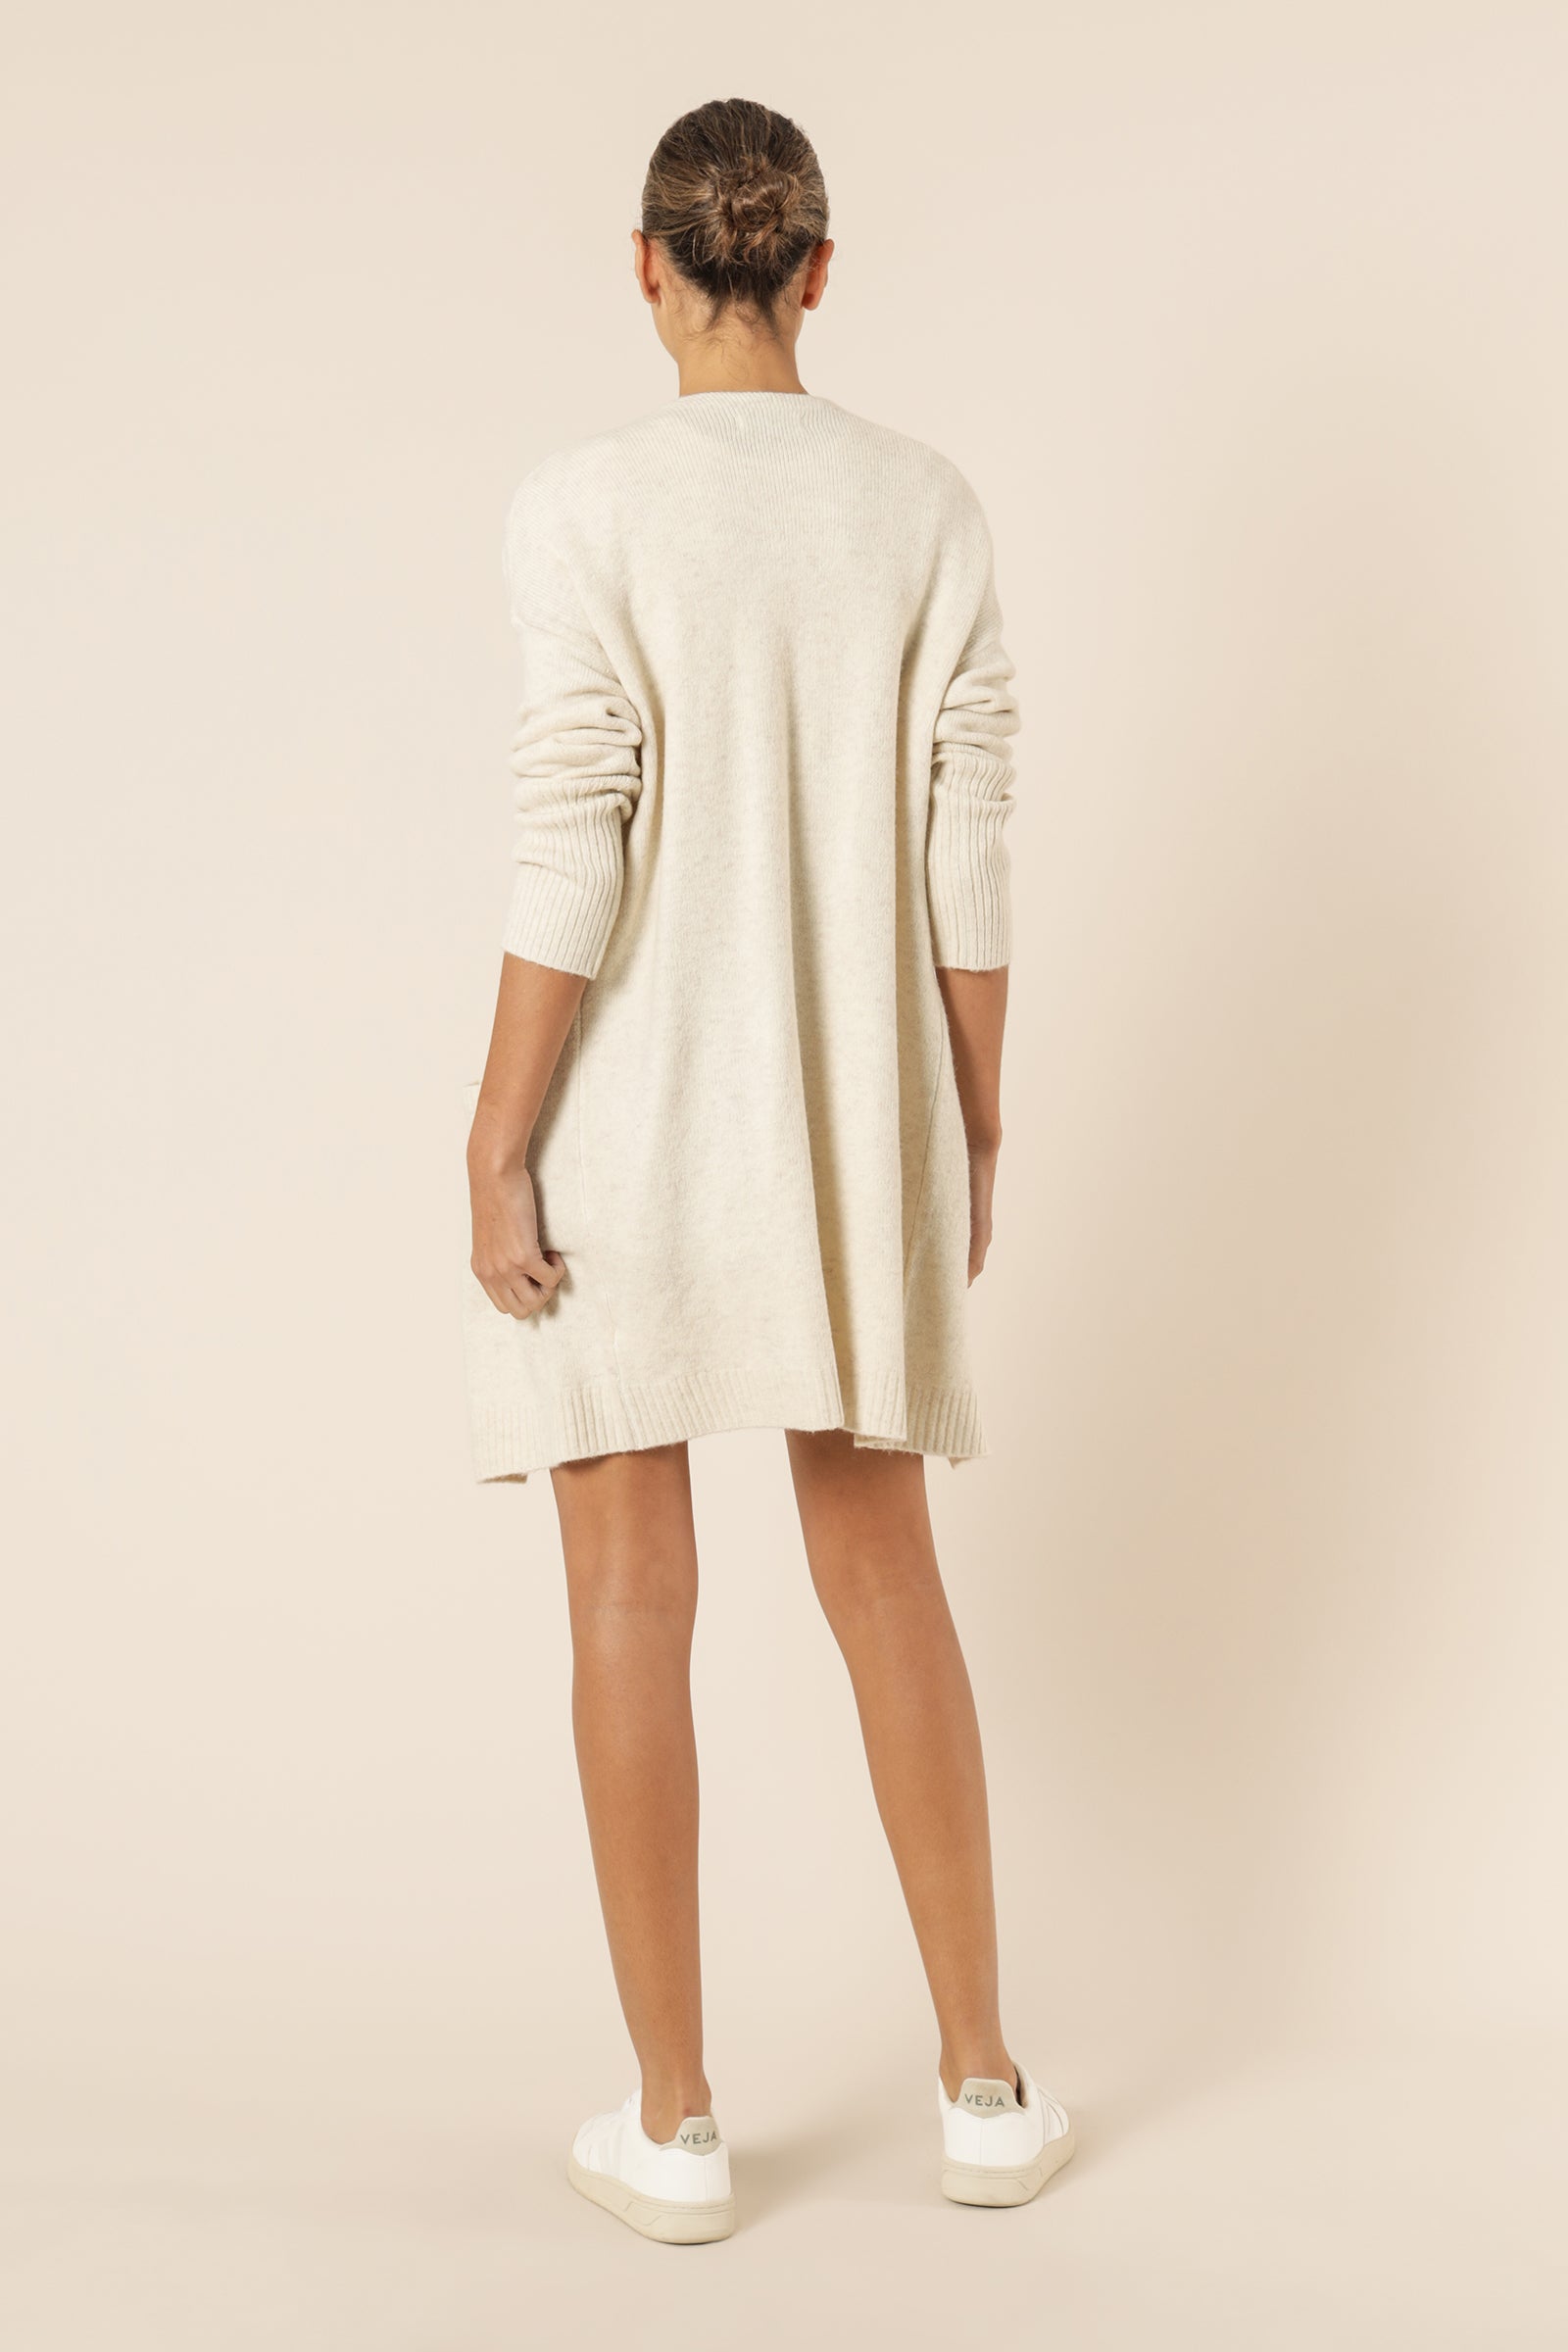 Nude Lucy avery cardigan cream marle knits